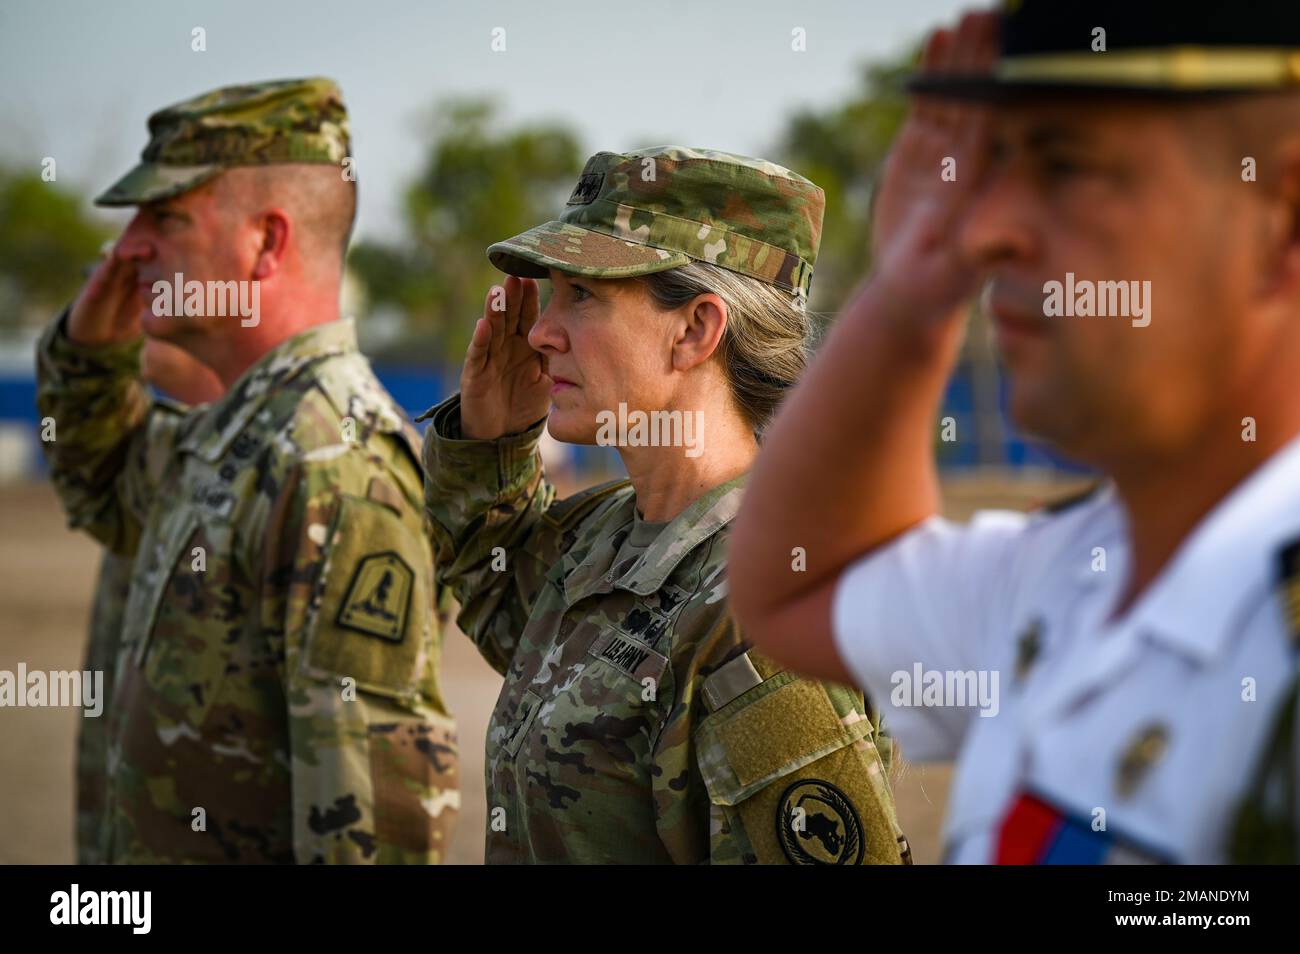 U.S. Army Maj. Gen. Jami Shawley, commanding general of Combined Joint Task Force - Horn of Africa (CJTF-HOA), renders a salute during a French Desert Commando Course graduation ceremony at the 5th Overseas Interarms Regiment, Djibouti, June 1, 2022. Members of the CJTF-HOA regularly train and work alongside allies, partners, and government organizations to achieve a unified effort to improve safety, security and prosperity in East Africa. Stock Photo